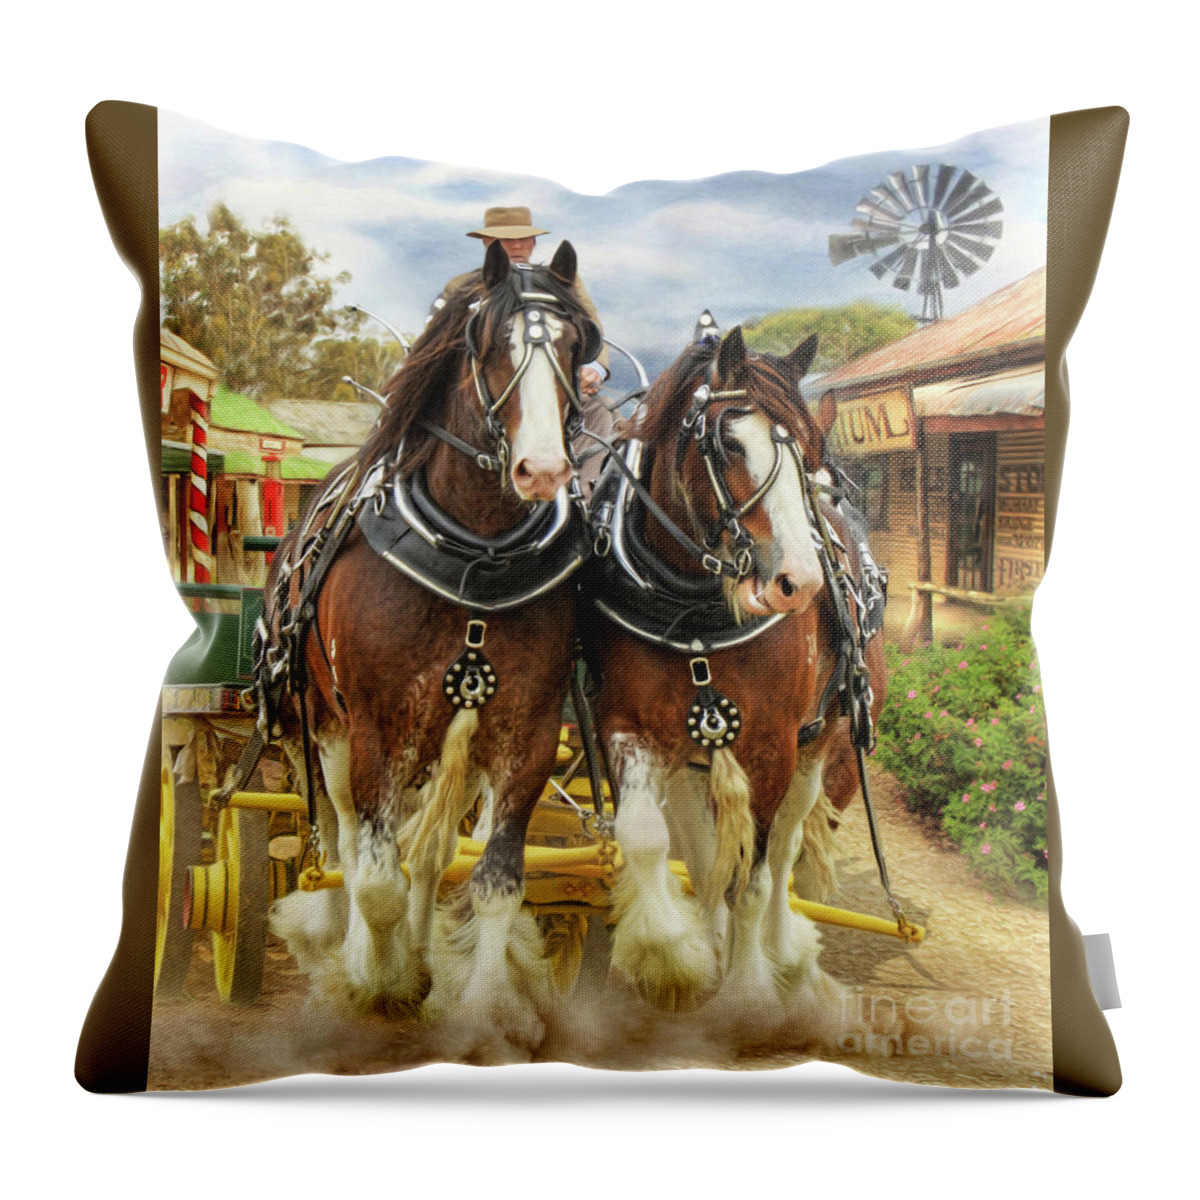 Harness Horse Throw Pillow featuring the digital art Heavy Horses by Trudi Simmonds